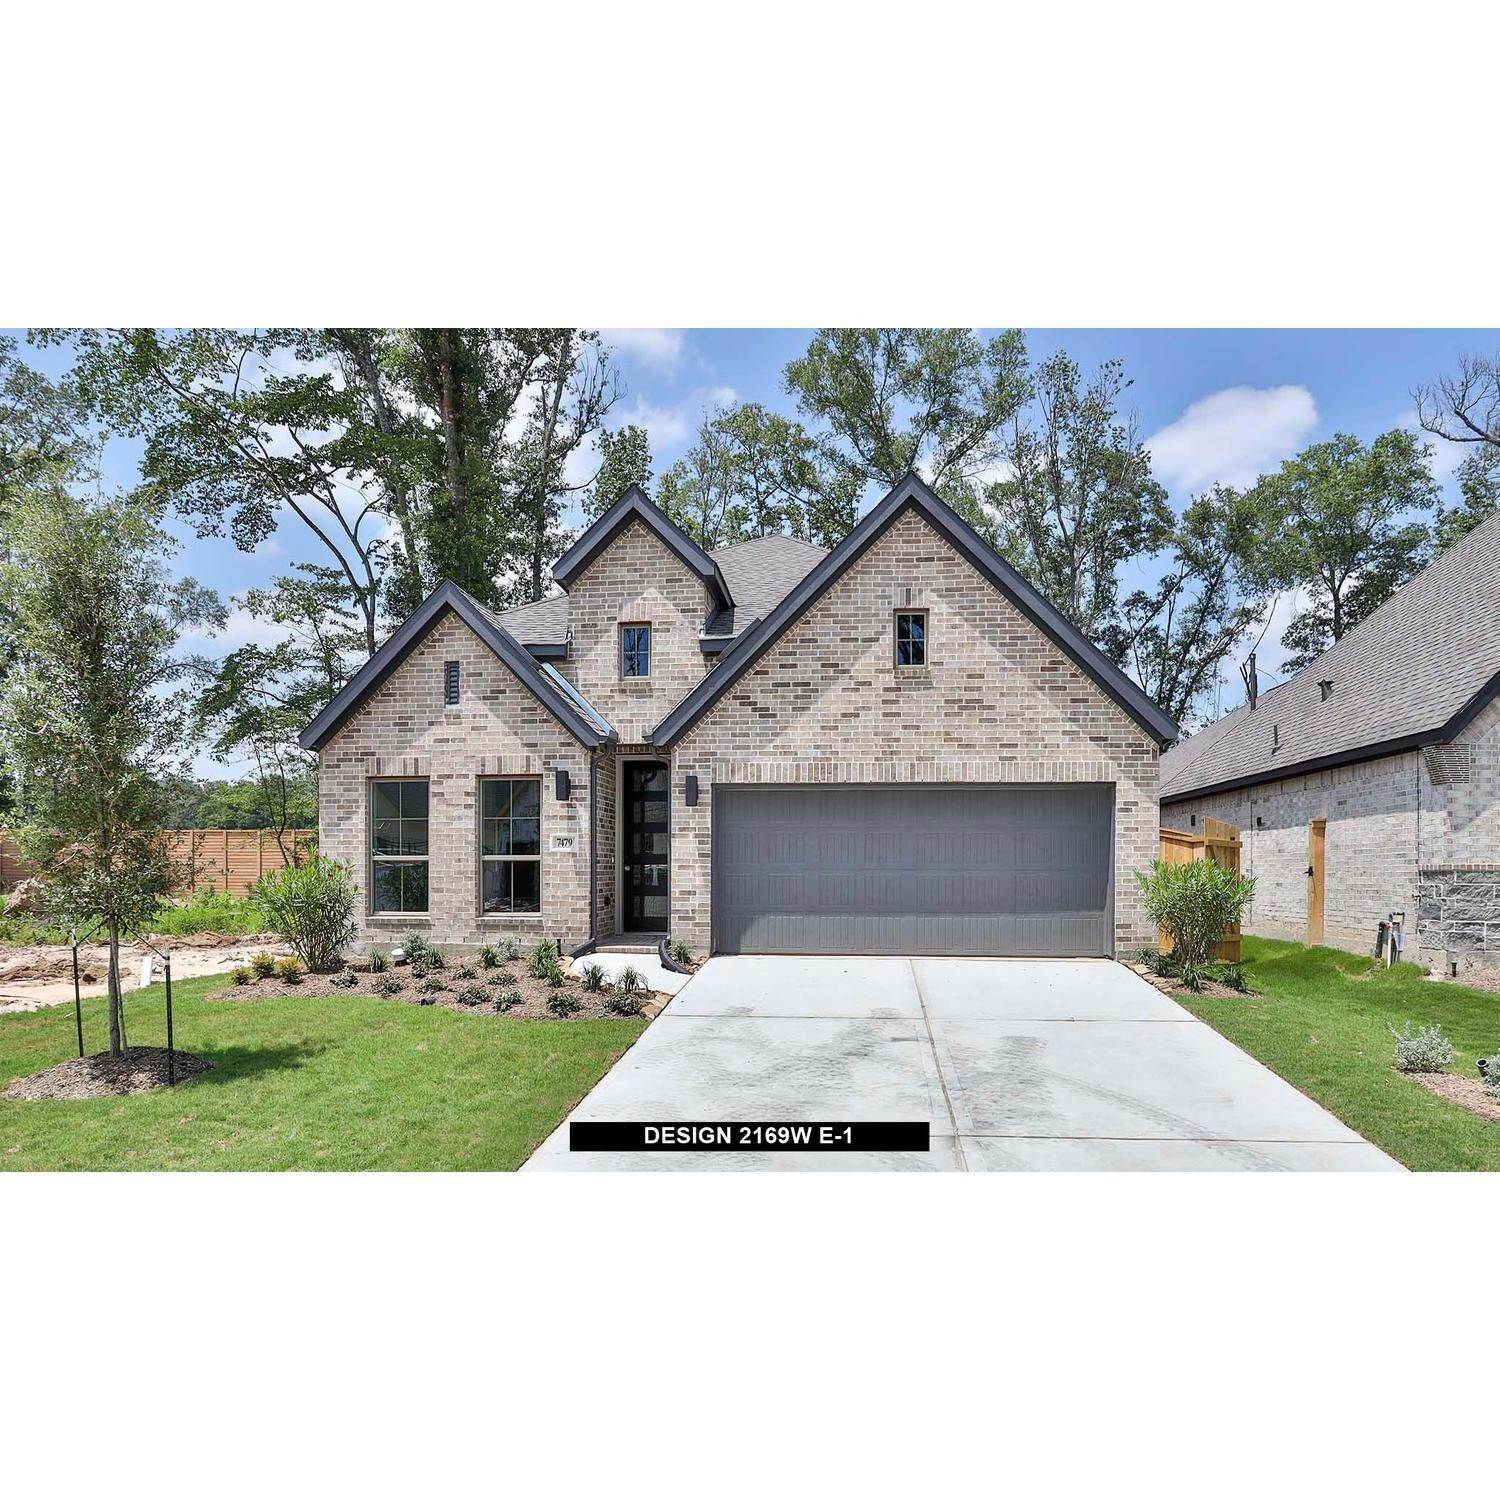 Single Family for Sale at Porter, TX 77365